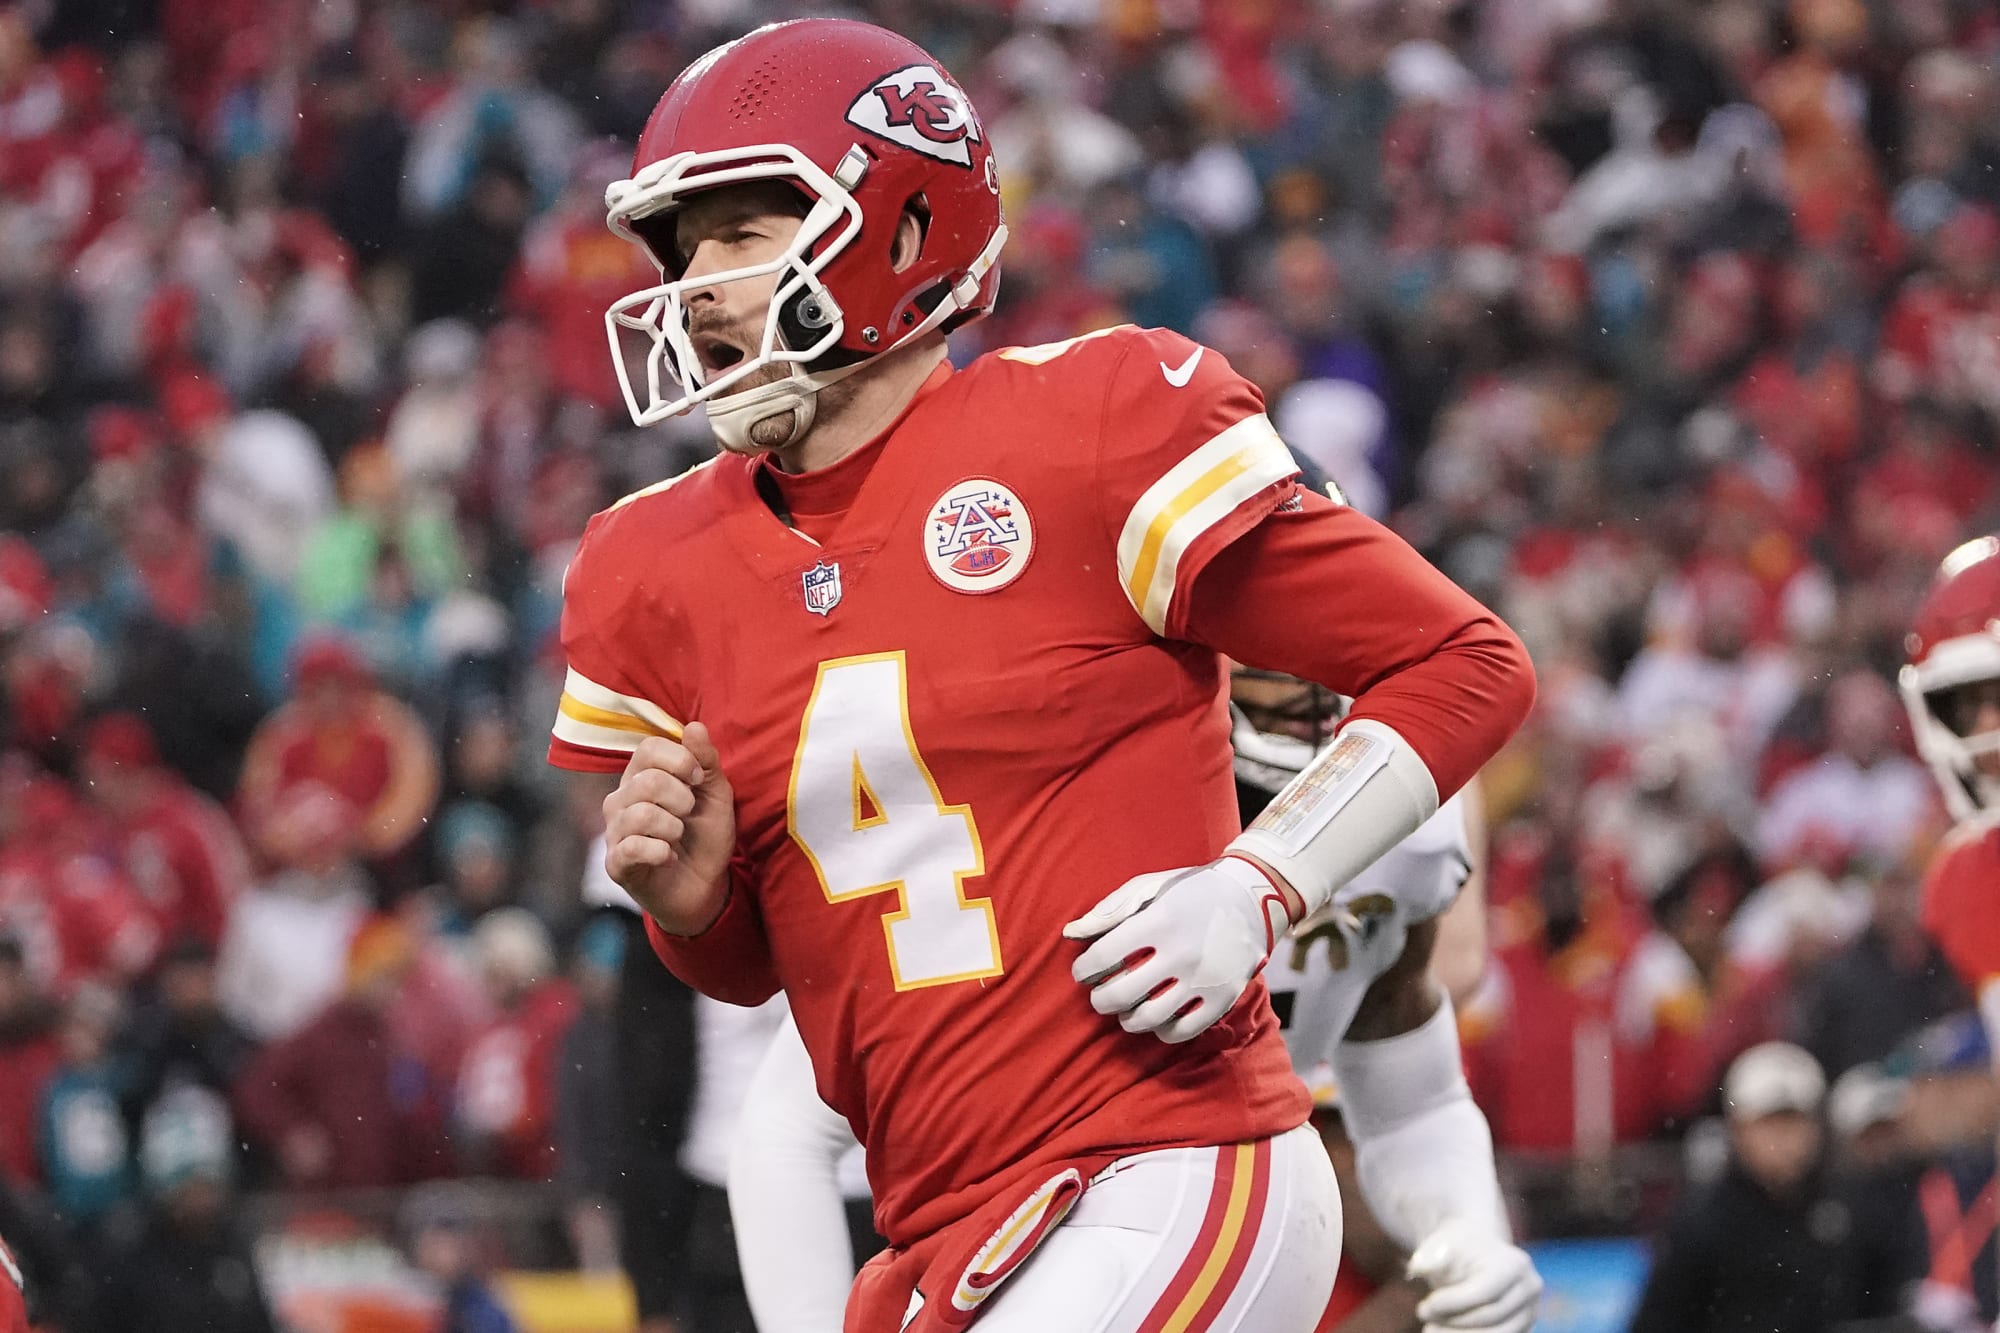 Michigan Football: Chad Henne helps Chiefs make AFC title game